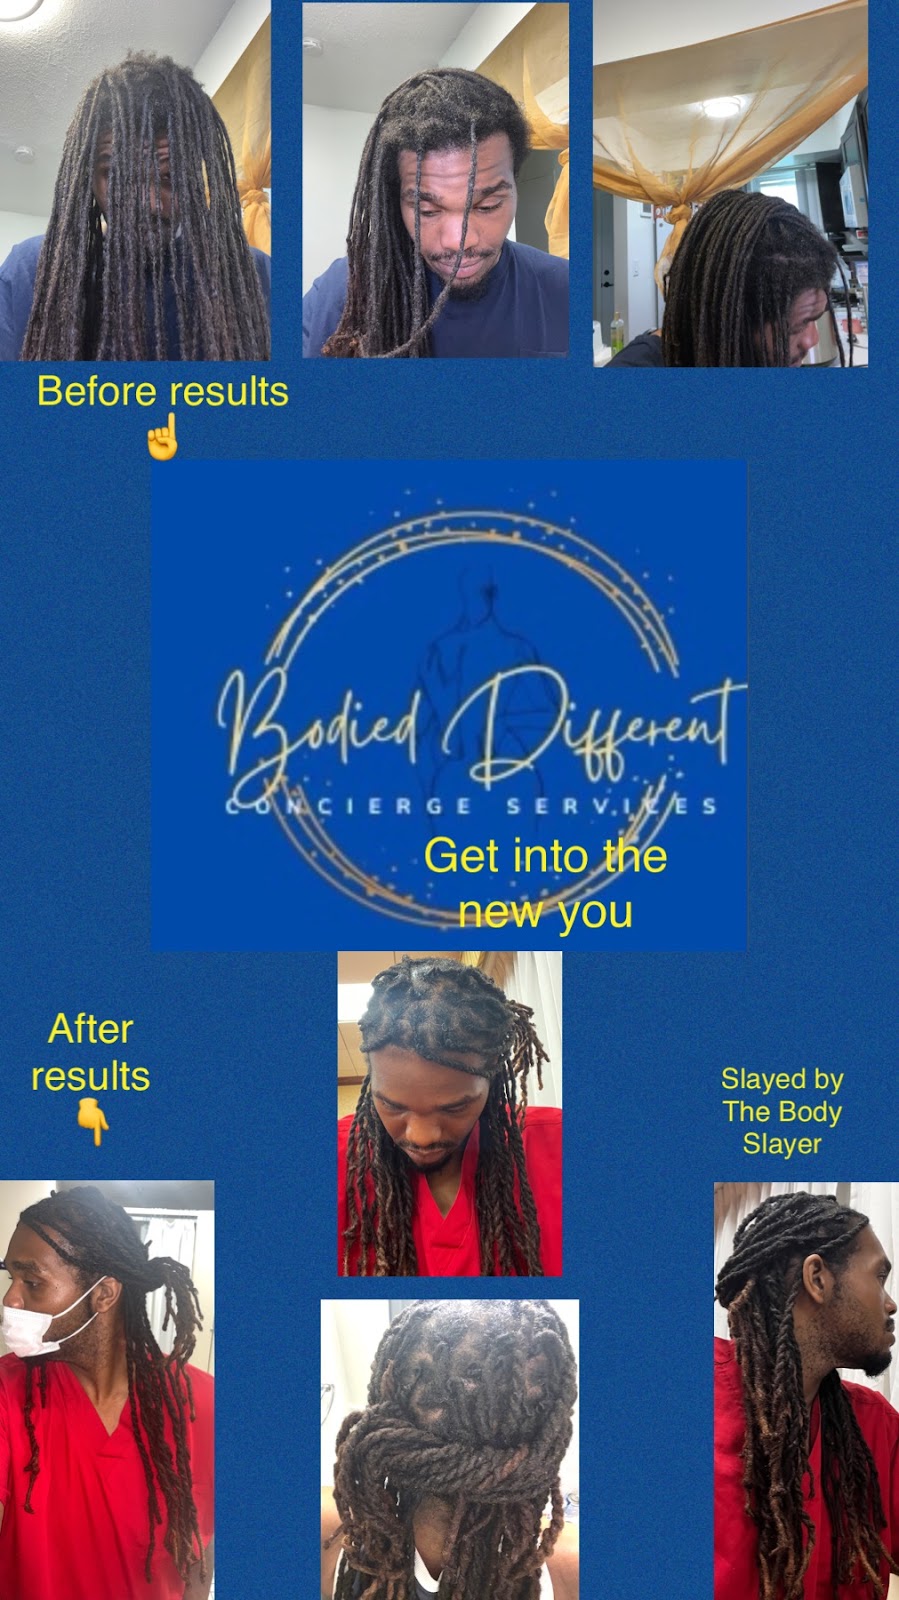 Bodied Different | 280 NY-211 # 1, Middletown, NY 10940 | Phone: (845) 239-6670